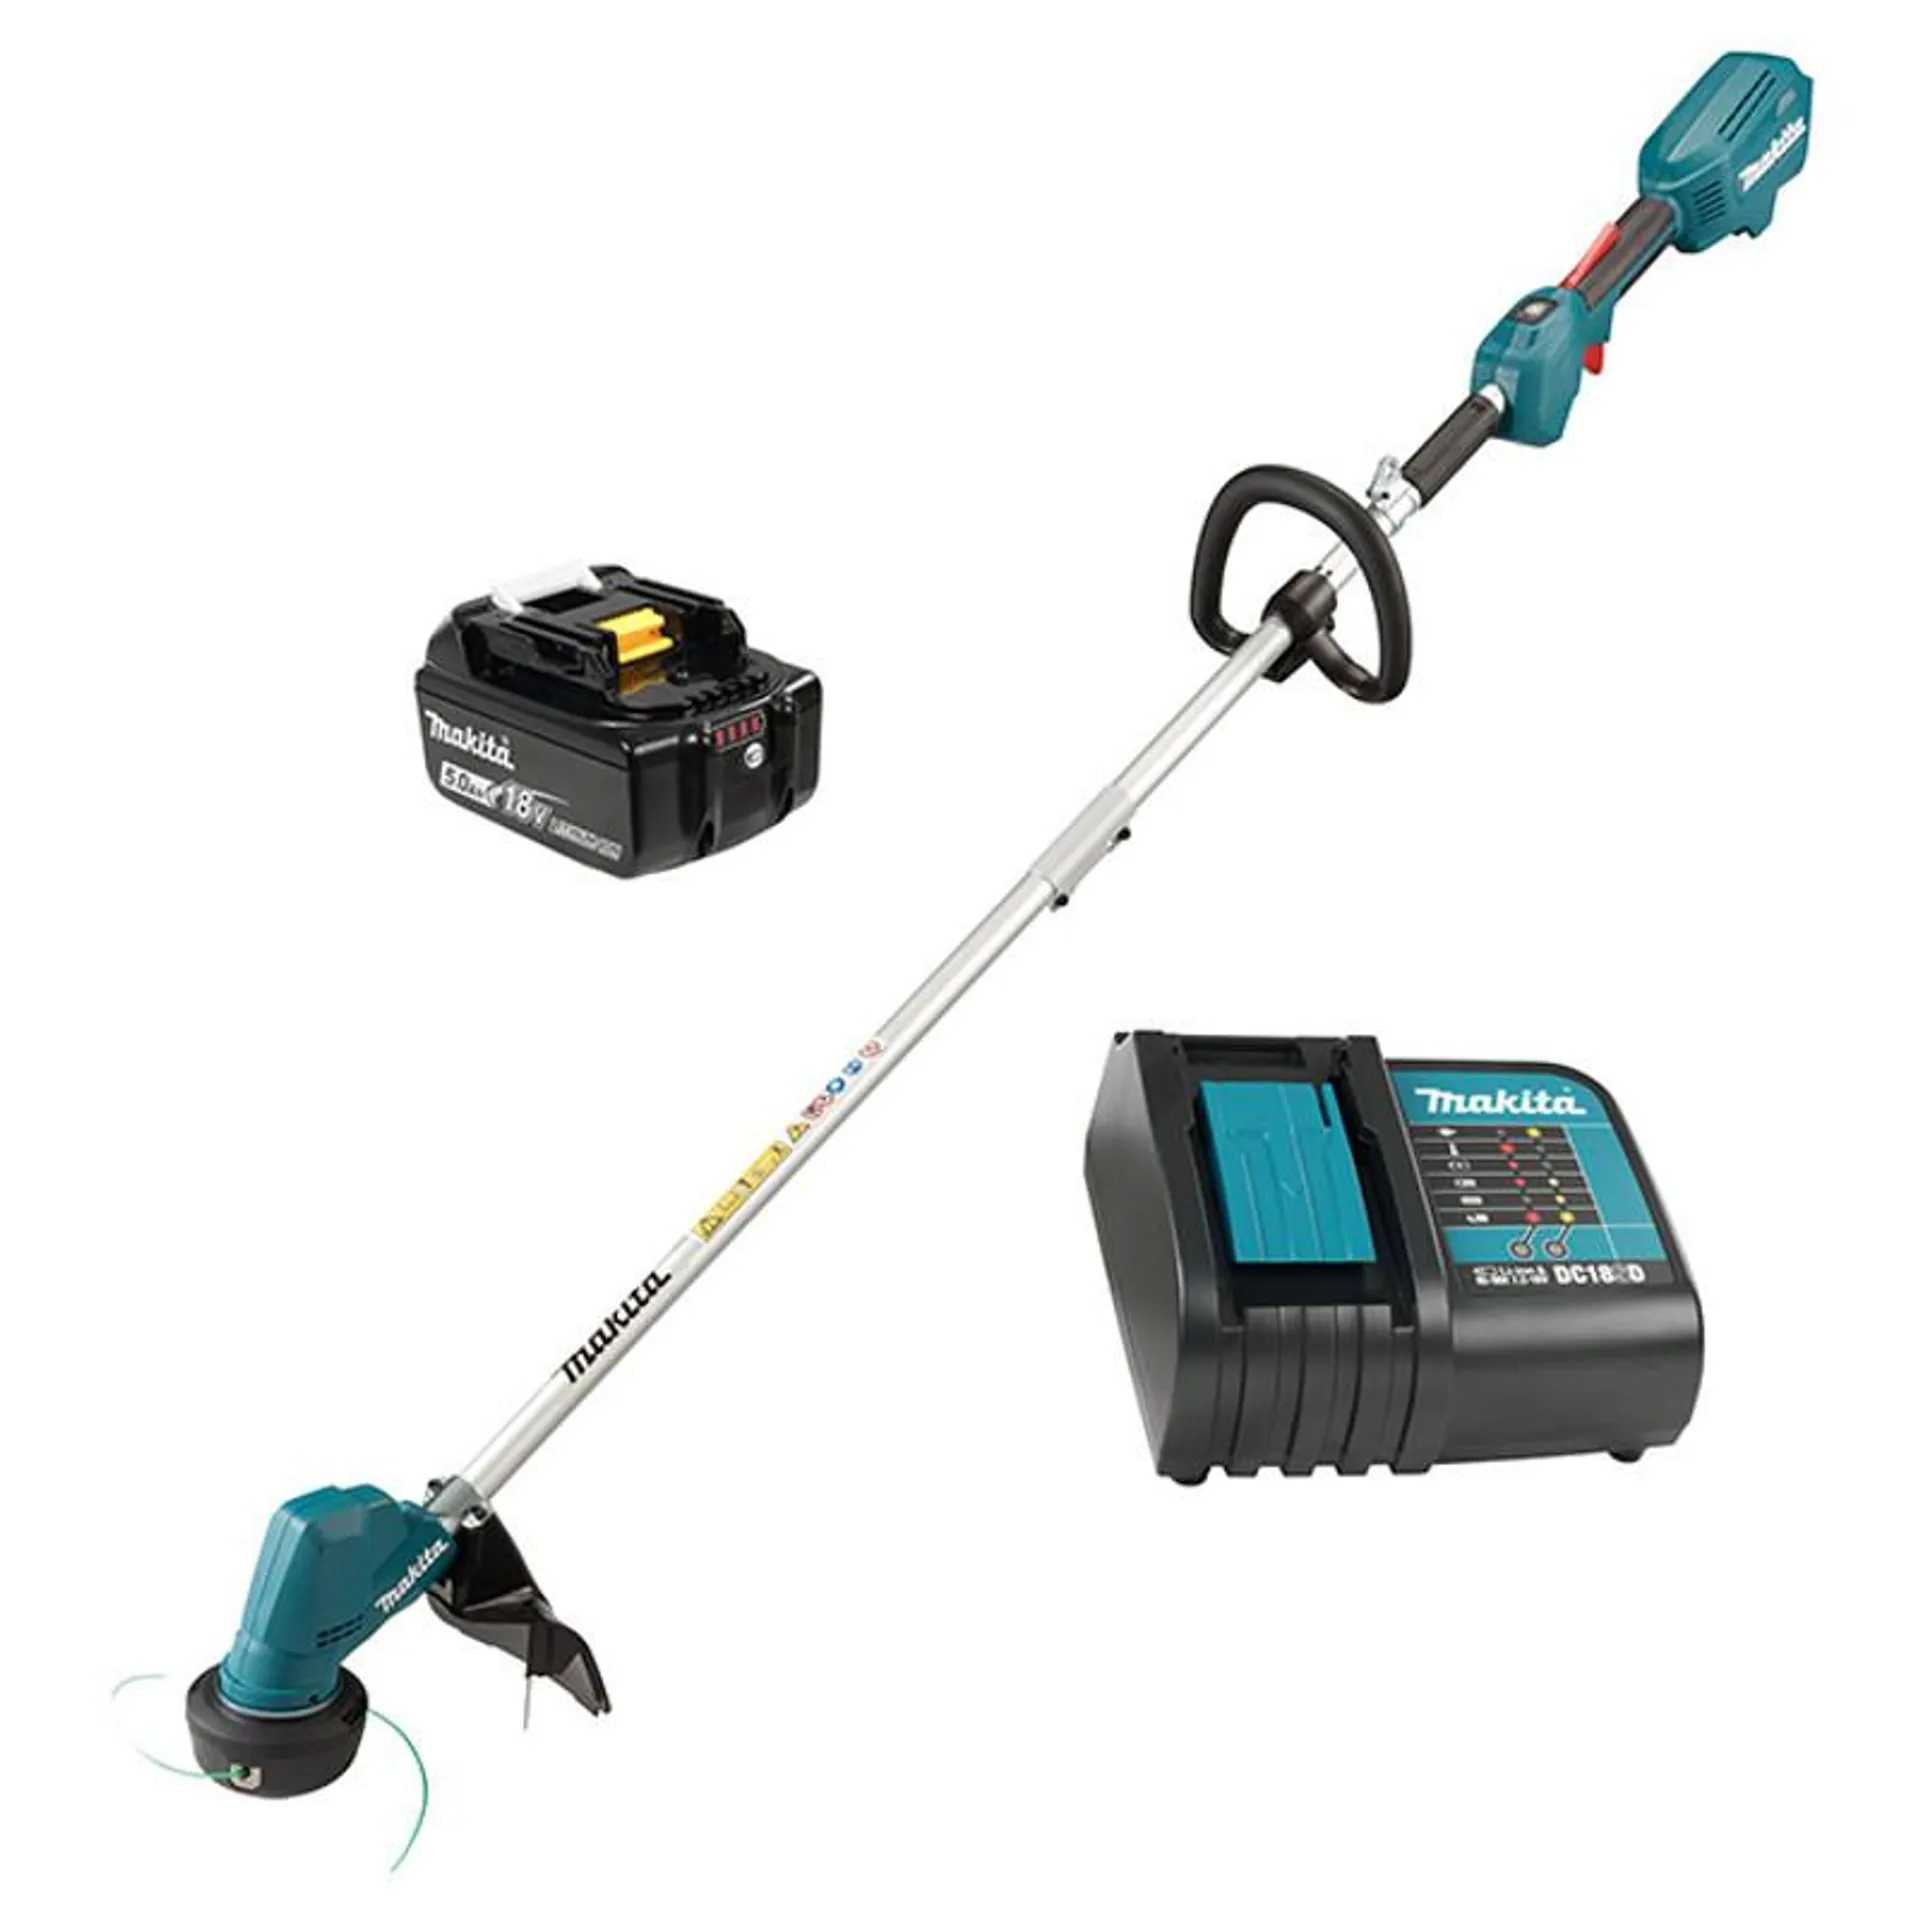 MAKITA 18V LINE TRIMMER 13IN. WITH BL1850B